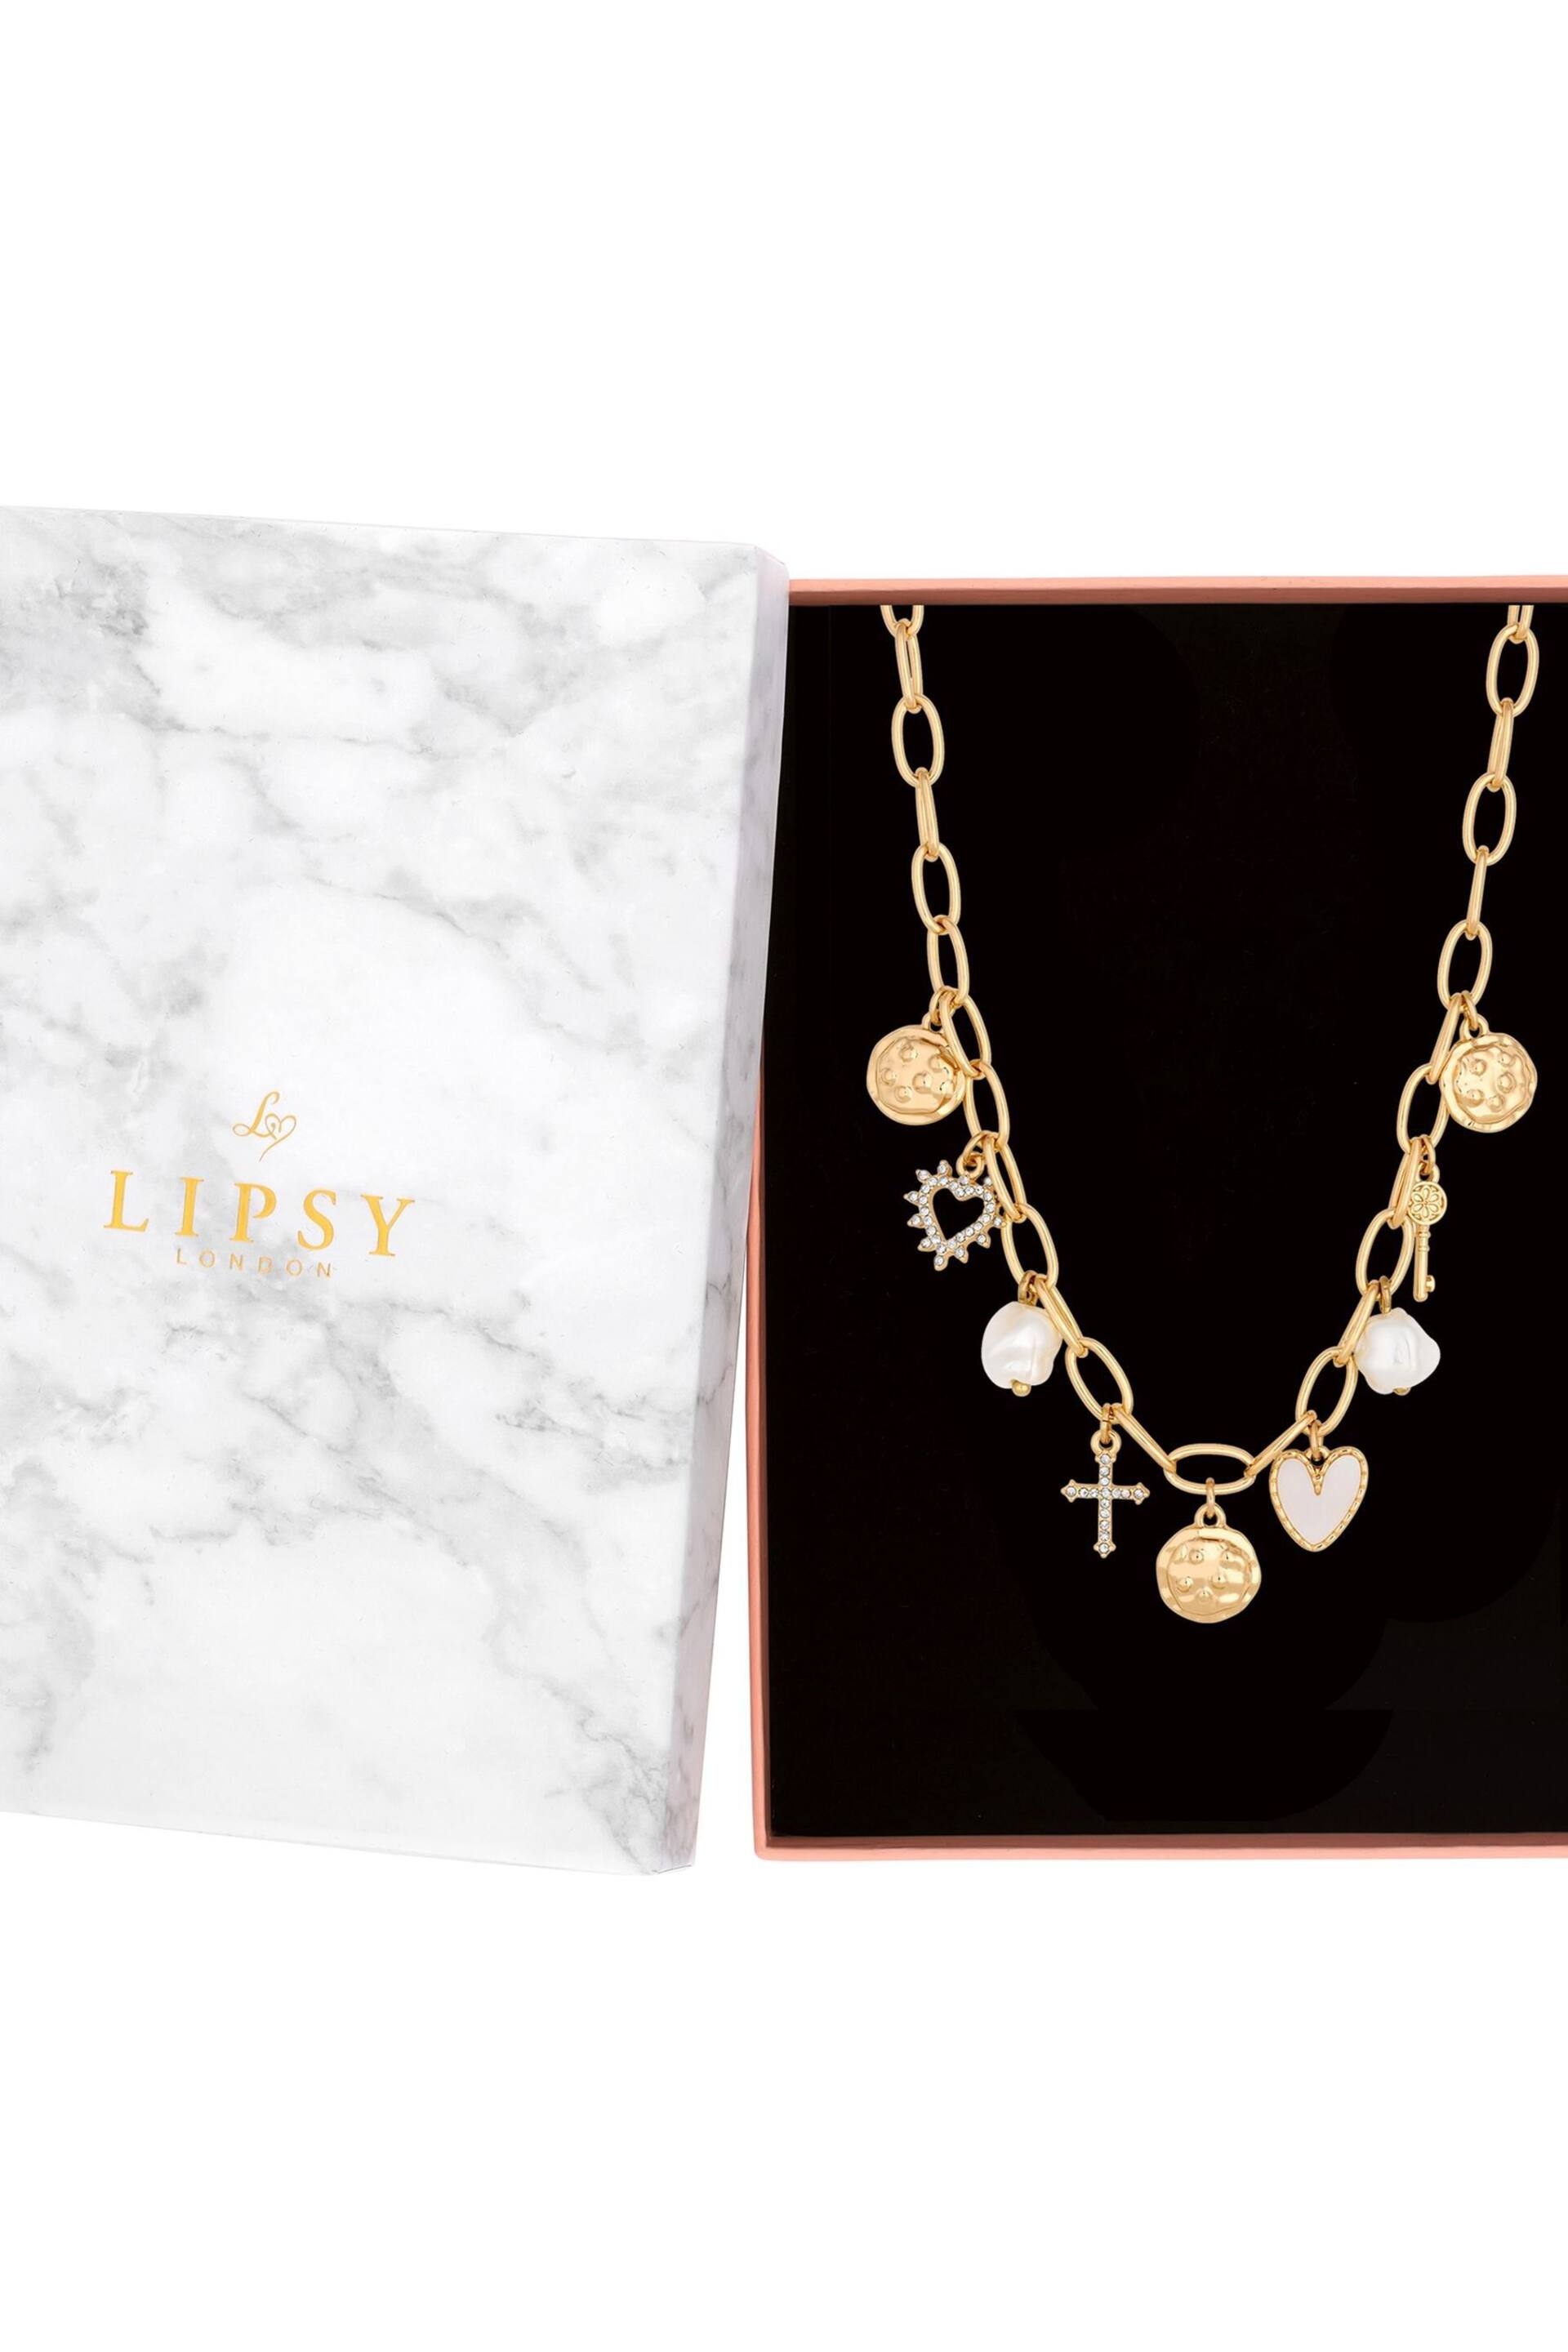 Lipsy Jewellery Gold Tone Pearl Talisman Charm Gift Boxed Necklace - Image 1 of 2